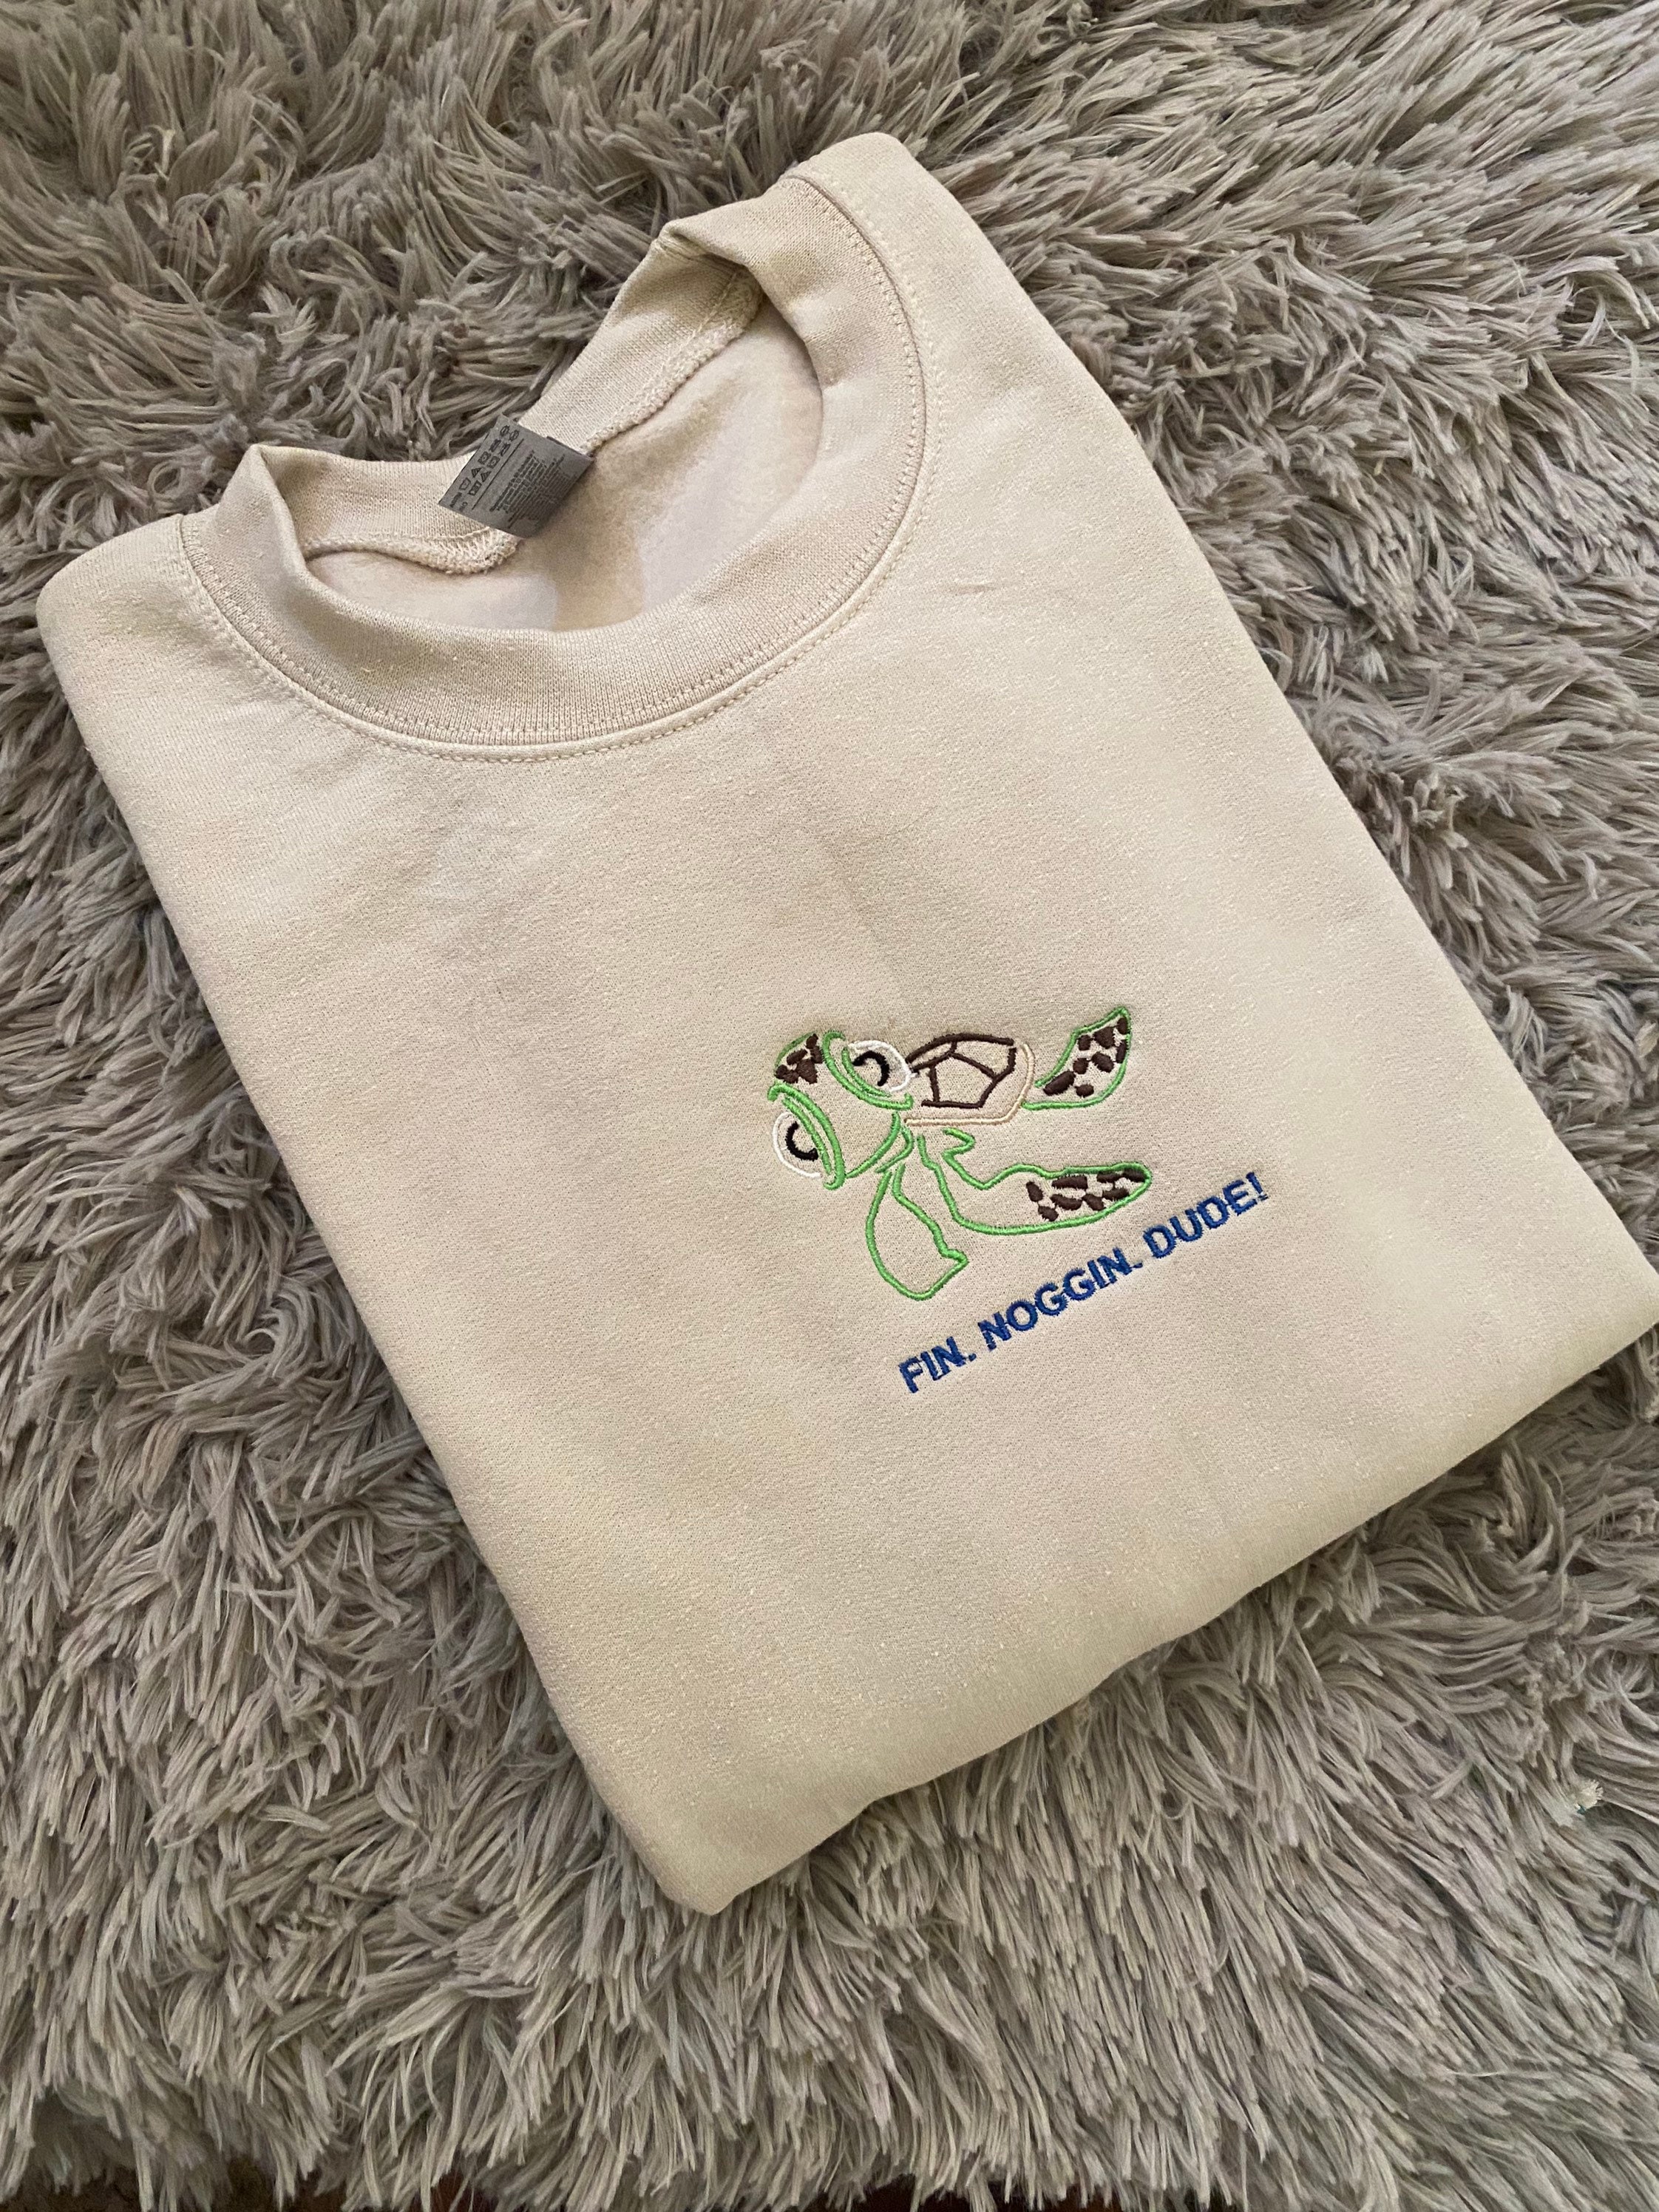 Squirt embroidered sweatshirt, embroidered crewneck, embroidered